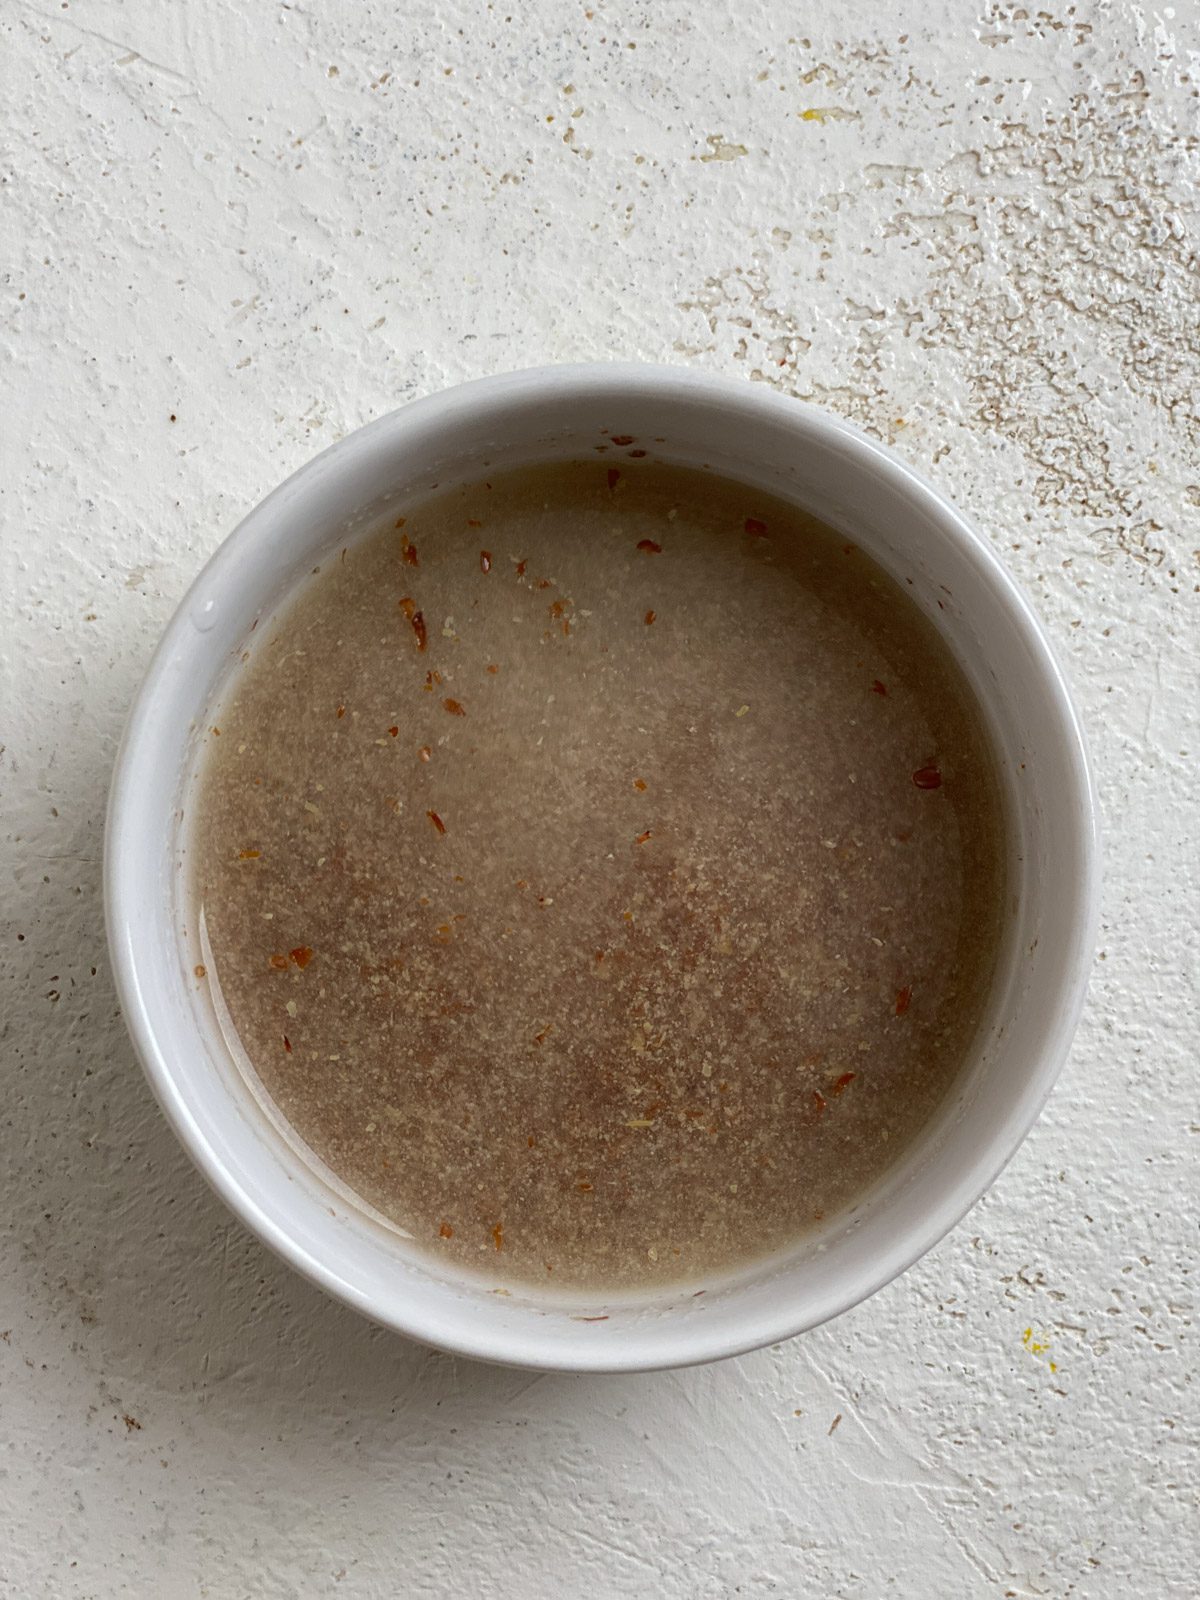 post mixing of water and flaxseed in bowl against white surface